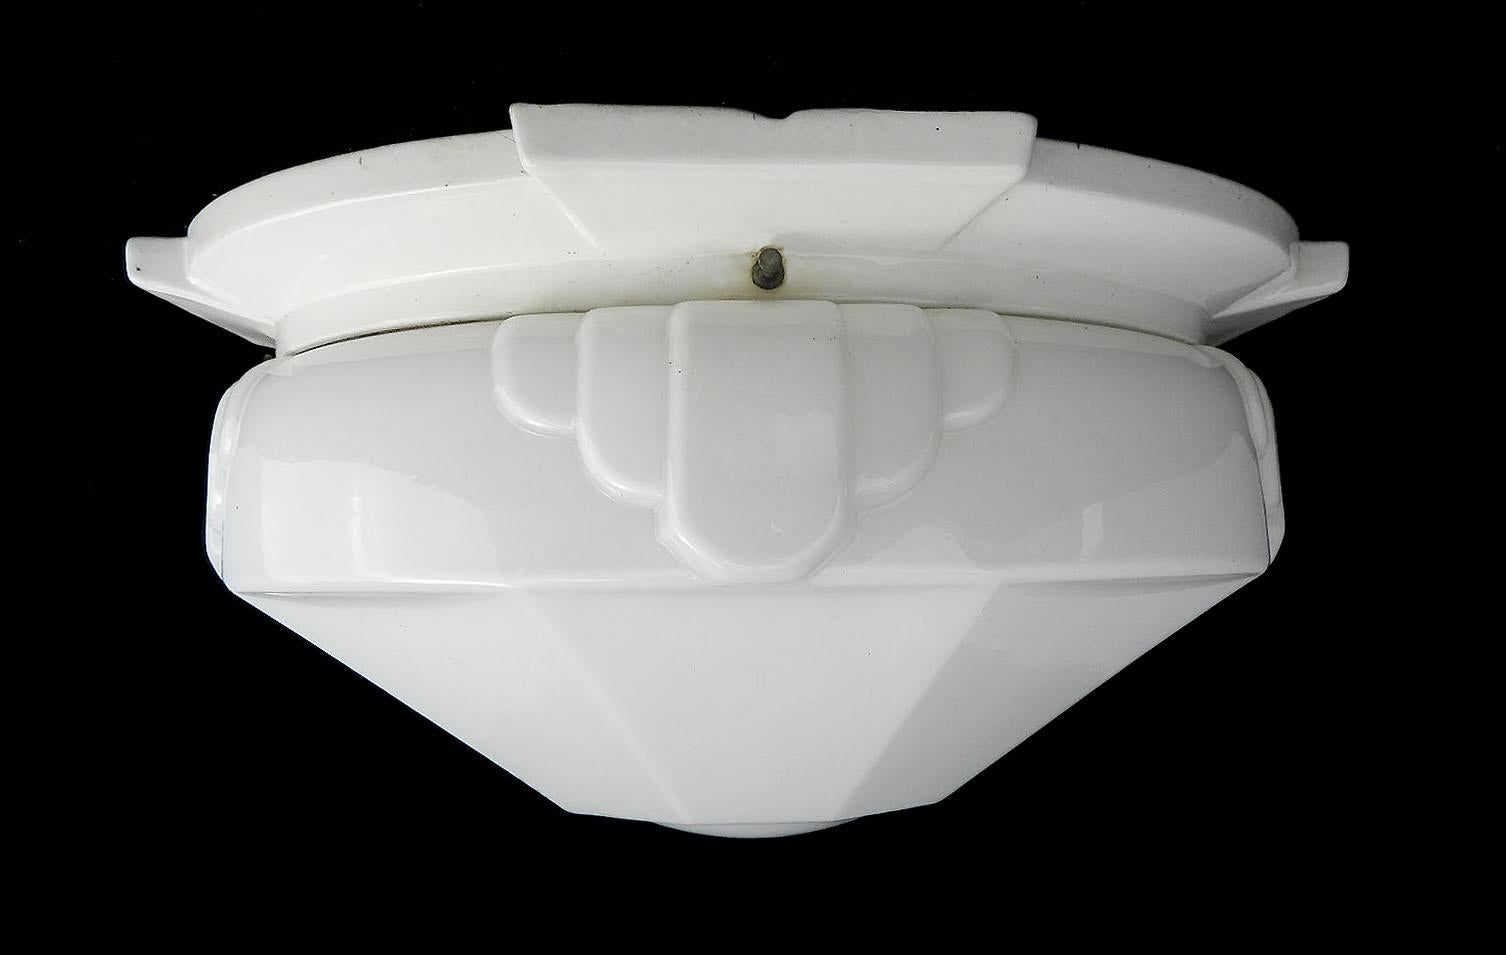 Art Deco flush mount large ceiling light or wall light sconce with Odeon glass shade circa 1930
All original white opaque glass shade on its white porcelain mount
Makers numbers impressed on the mount
This takes two bulbs at present
Opaque white